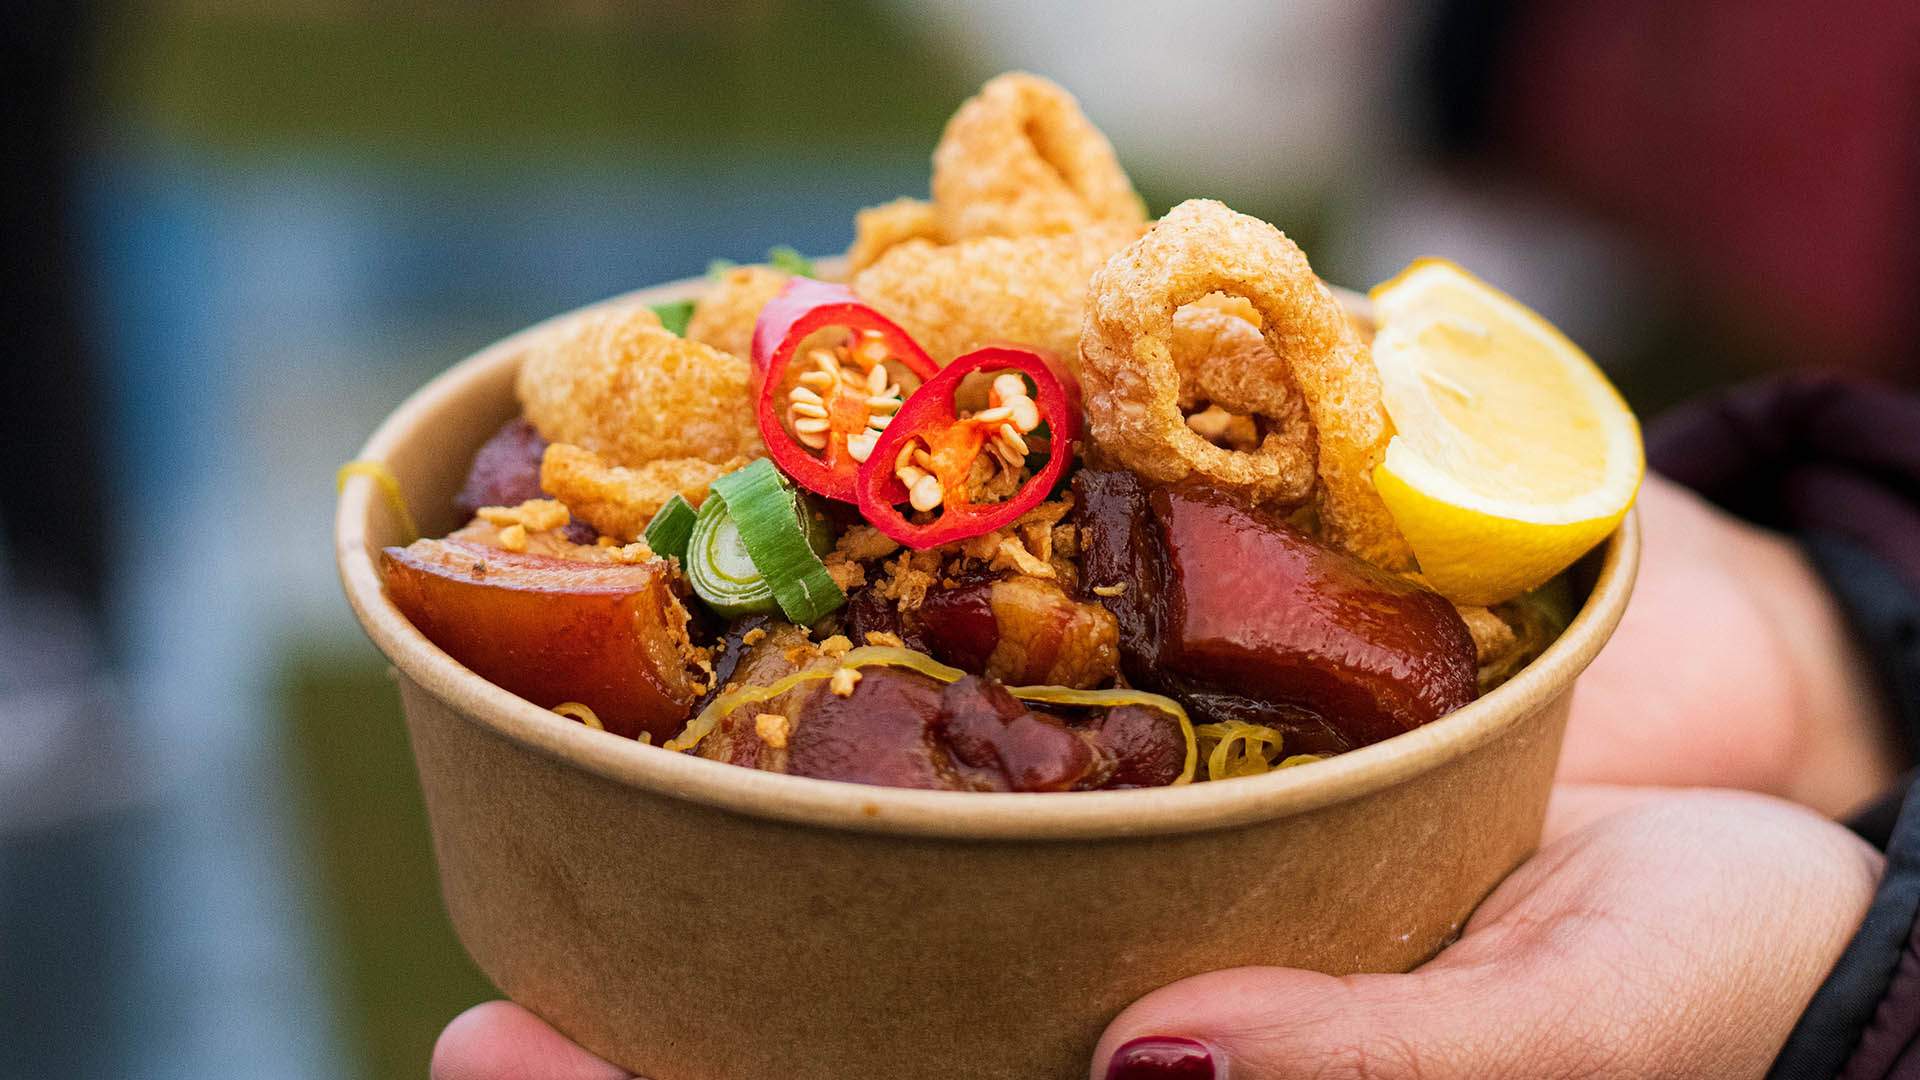 Mochi Doughnuts, Skewers and Gravity-Defying Noods: Here's the Brisbane Night Noodle Markets Menu